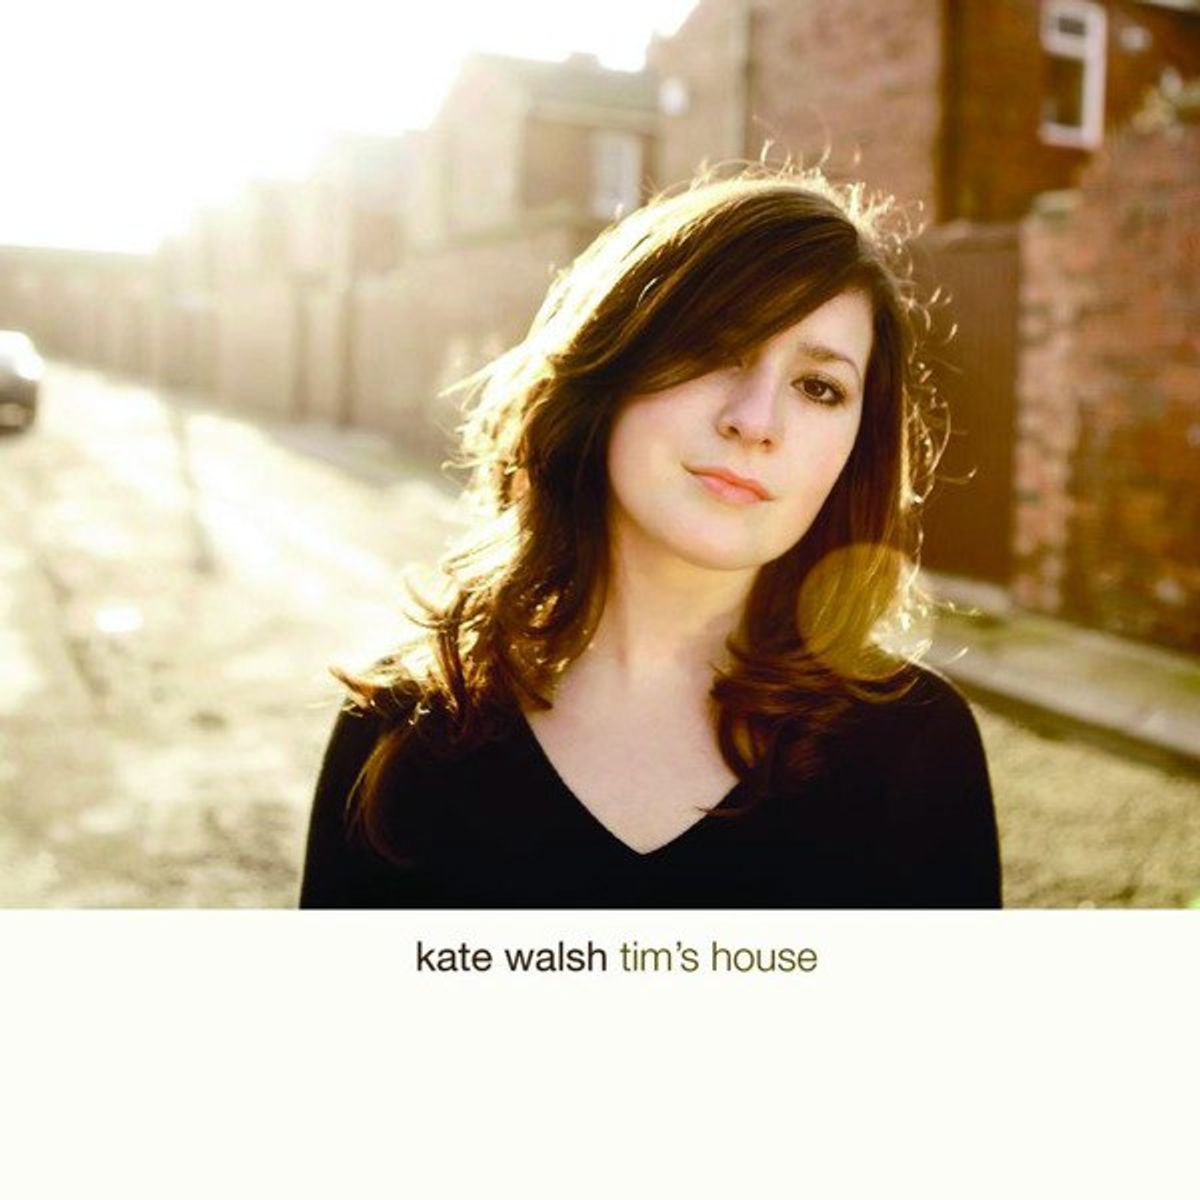 Tim's House: The Perfect Fall Album By Kate Walsh